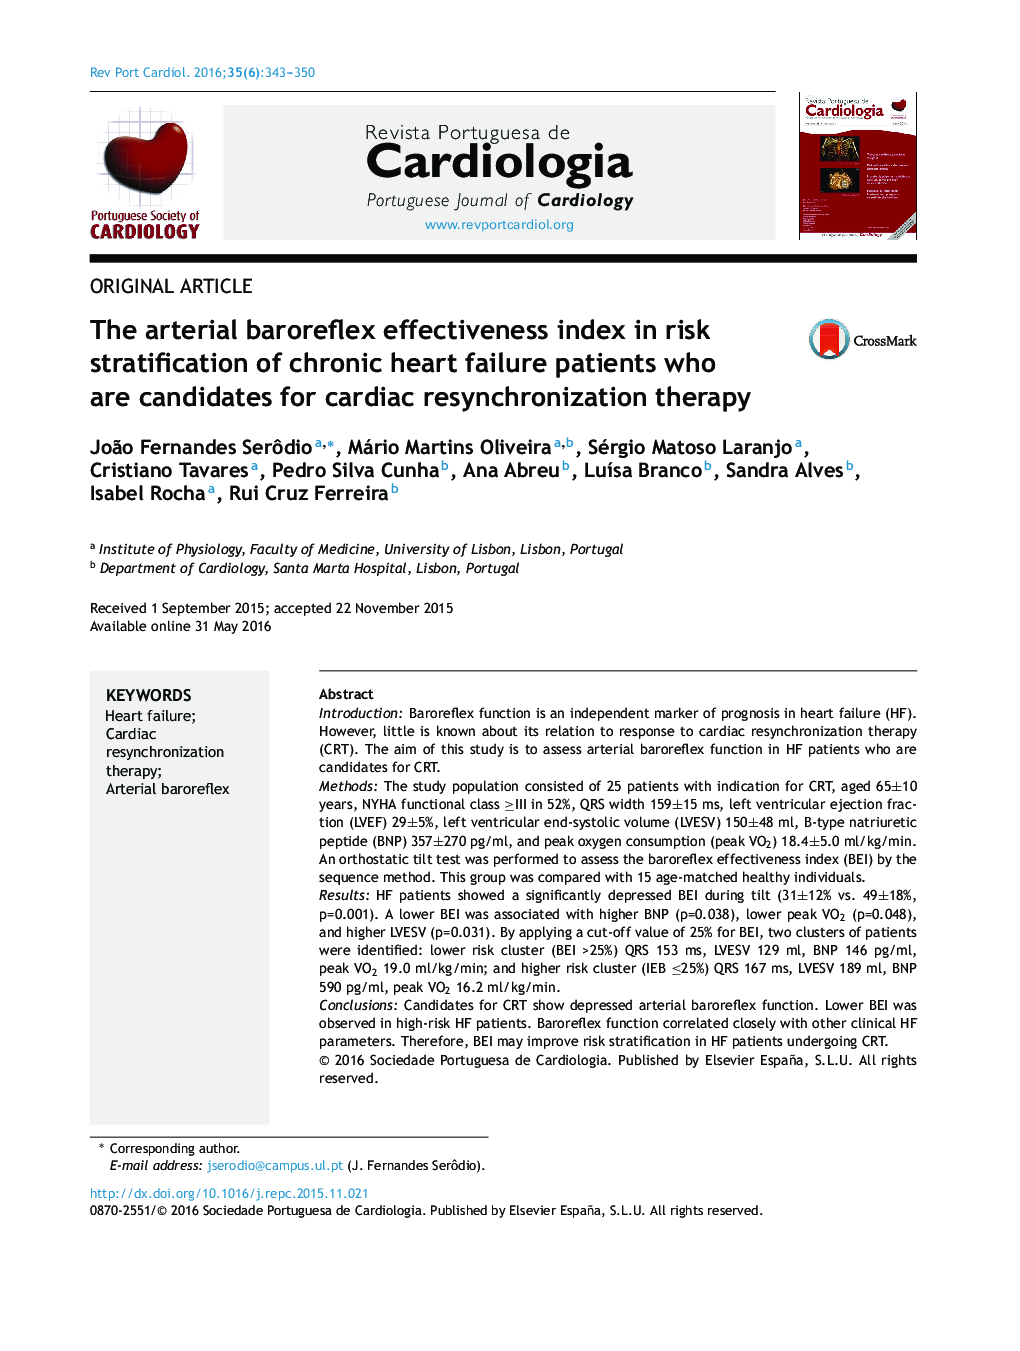 The arterial baroreflex effectiveness index in risk stratification of chronic heart failure patients who are candidates for cardiac resynchronization therapy